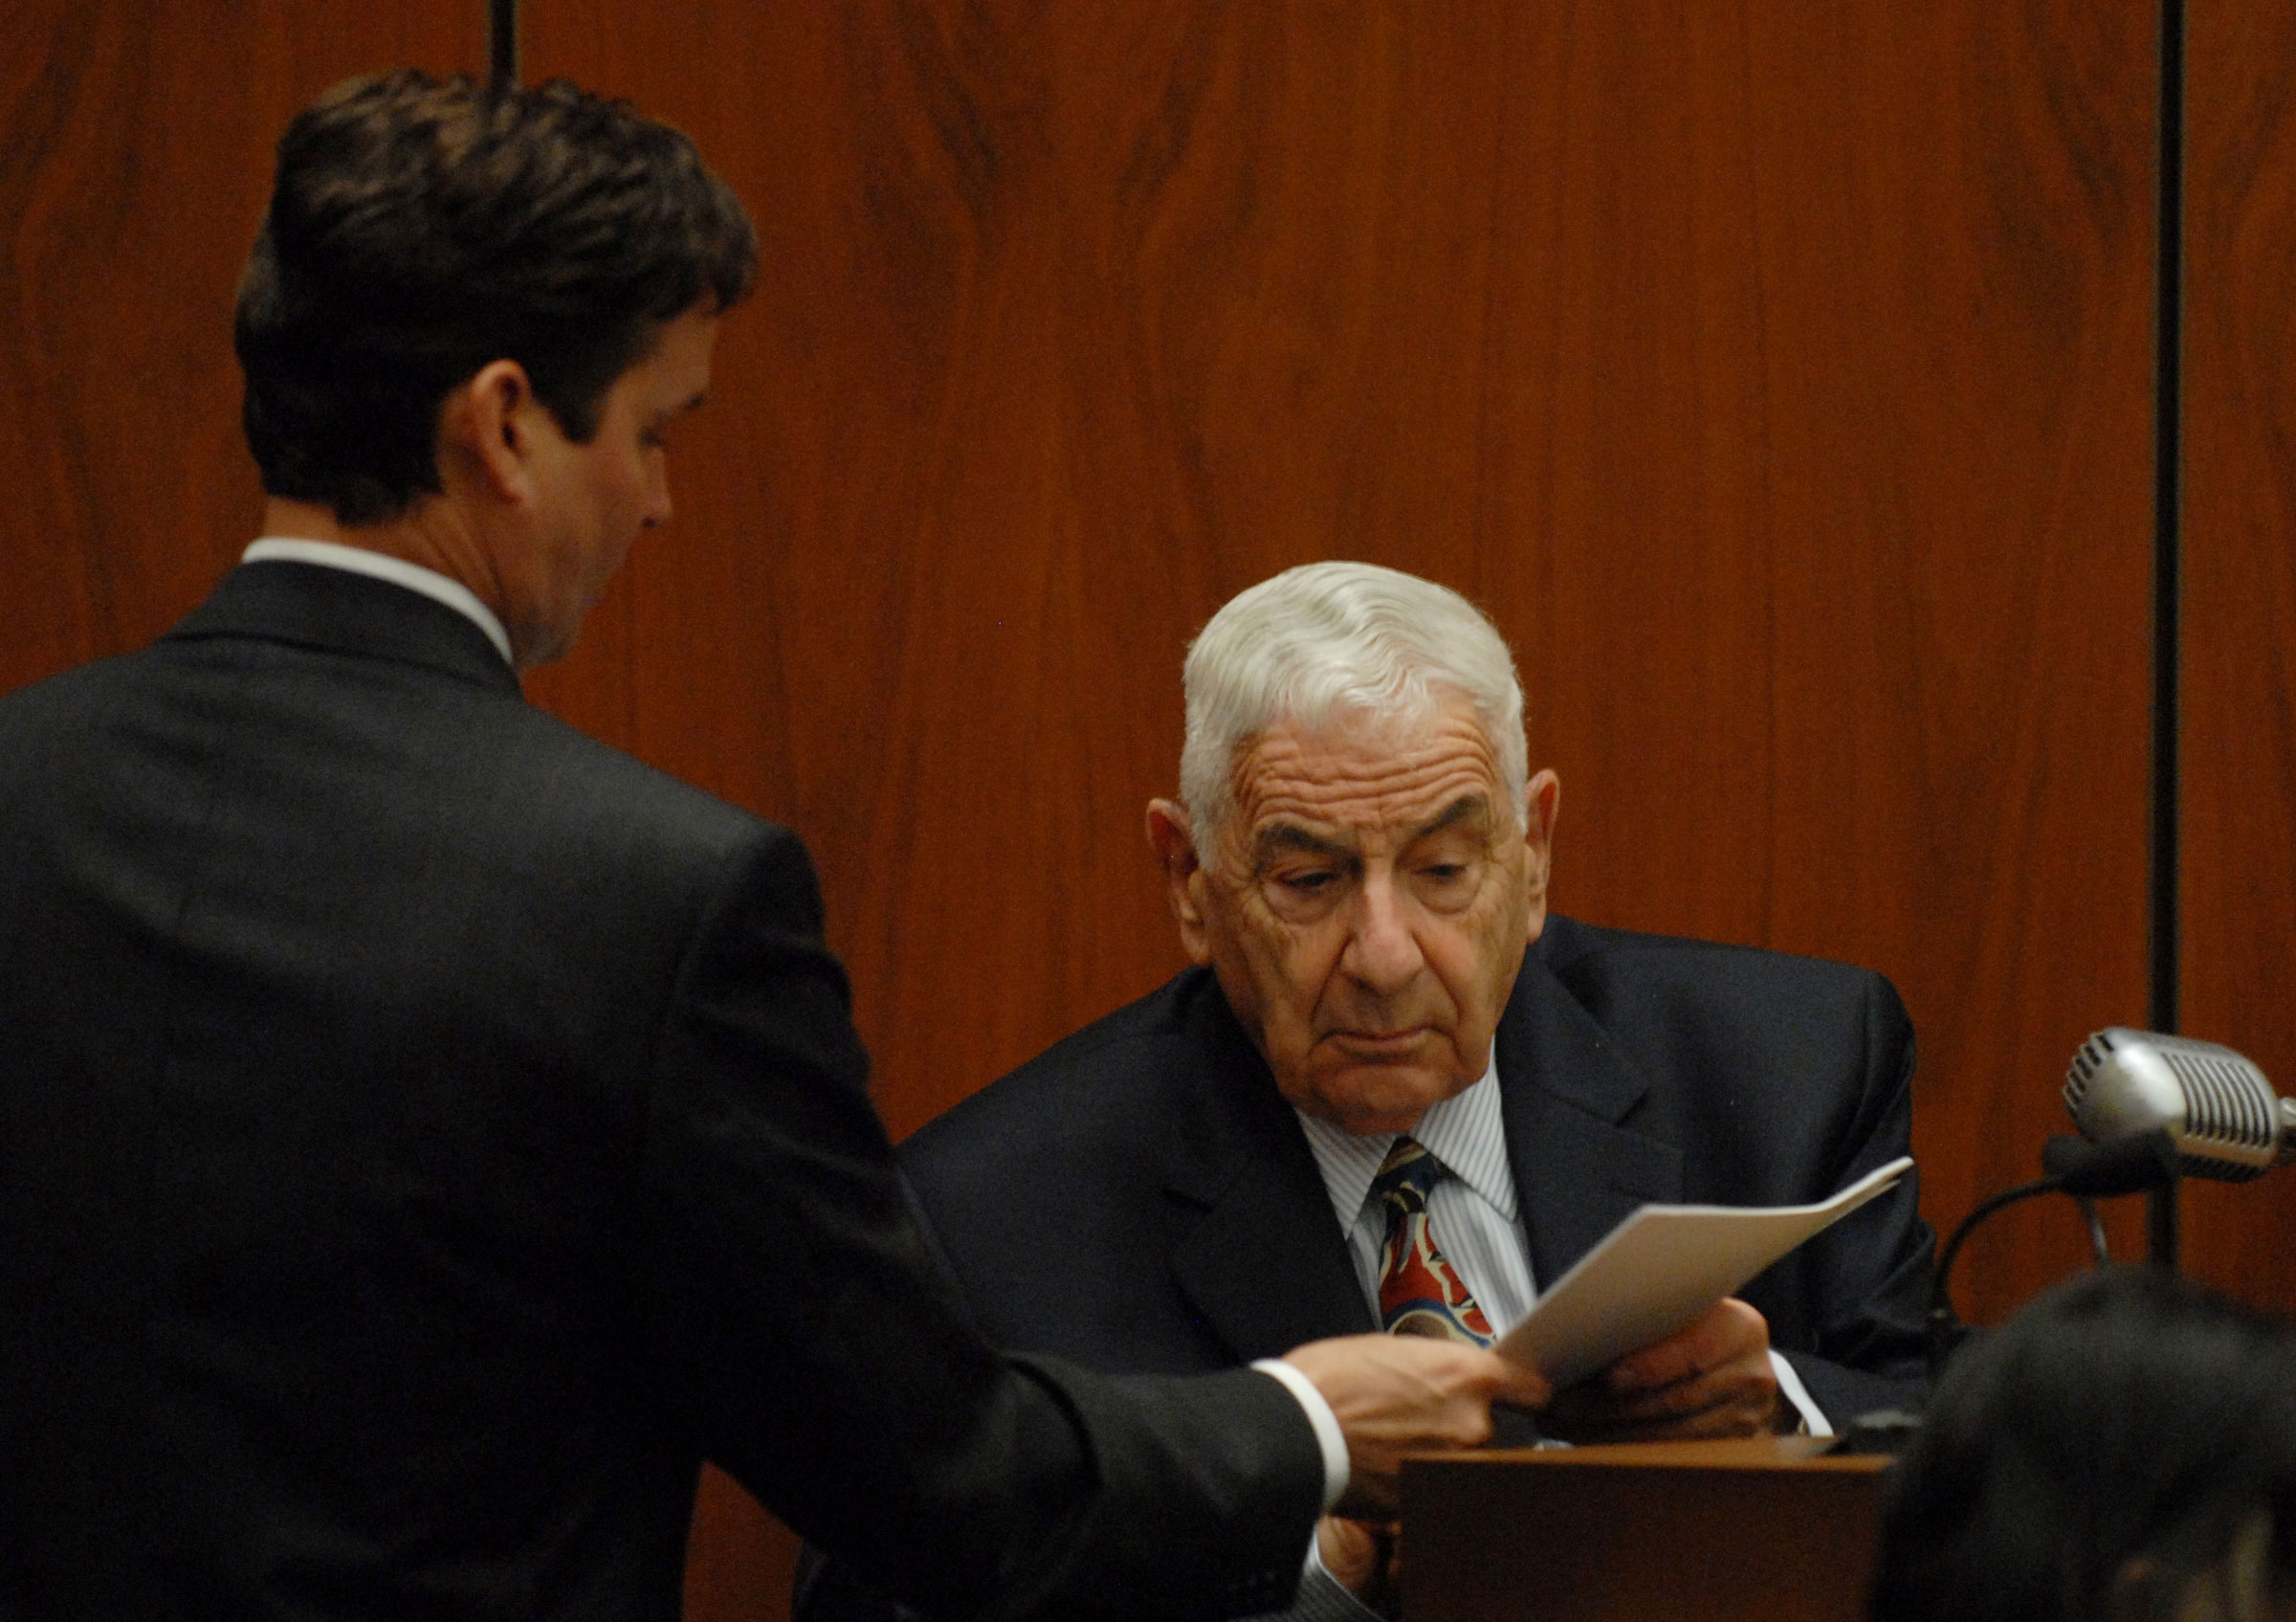 Prosecutor Alan Jackson cross examines defense witness Werner Spitz, a forensic pathologist in the murder trial of music producer Phil Spector in Superior Court July 26, 2007, in Los Angeles. (Jamie Rector—Getty Images)